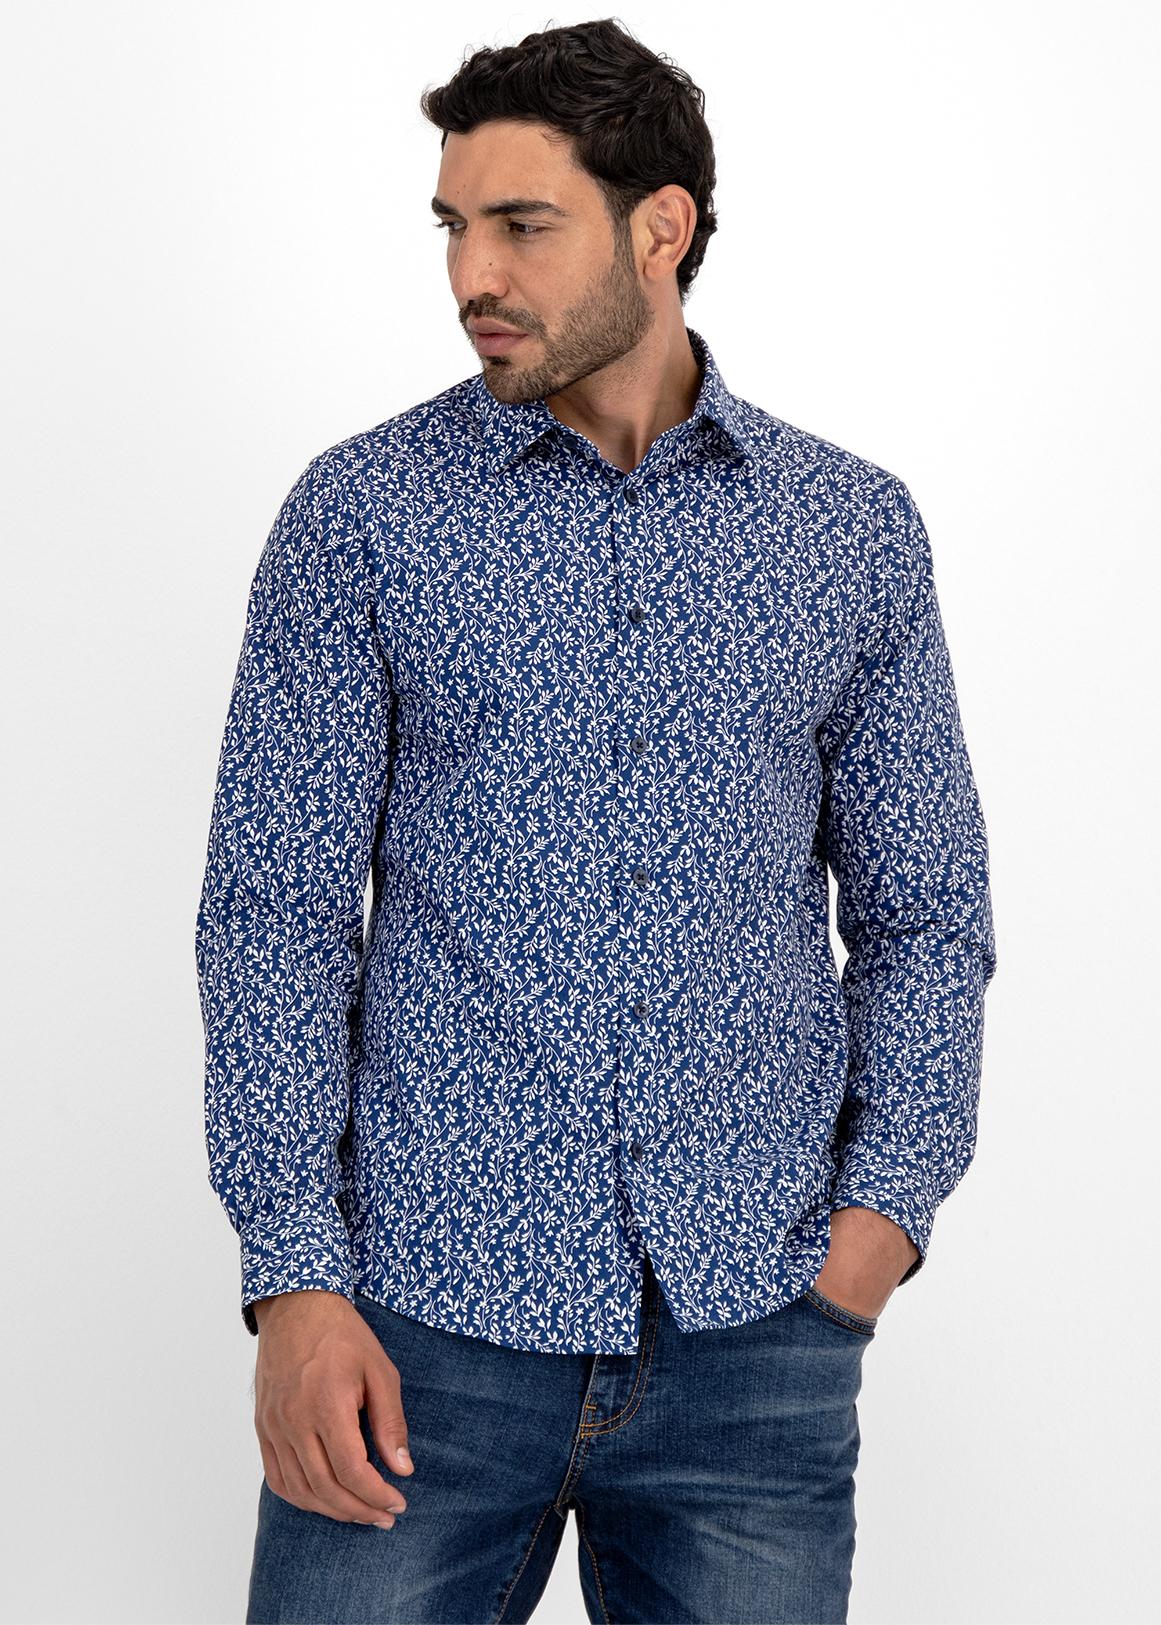 Mens Floral Beach Shirt Casual Long Sleeve Slim Fit Button Formal